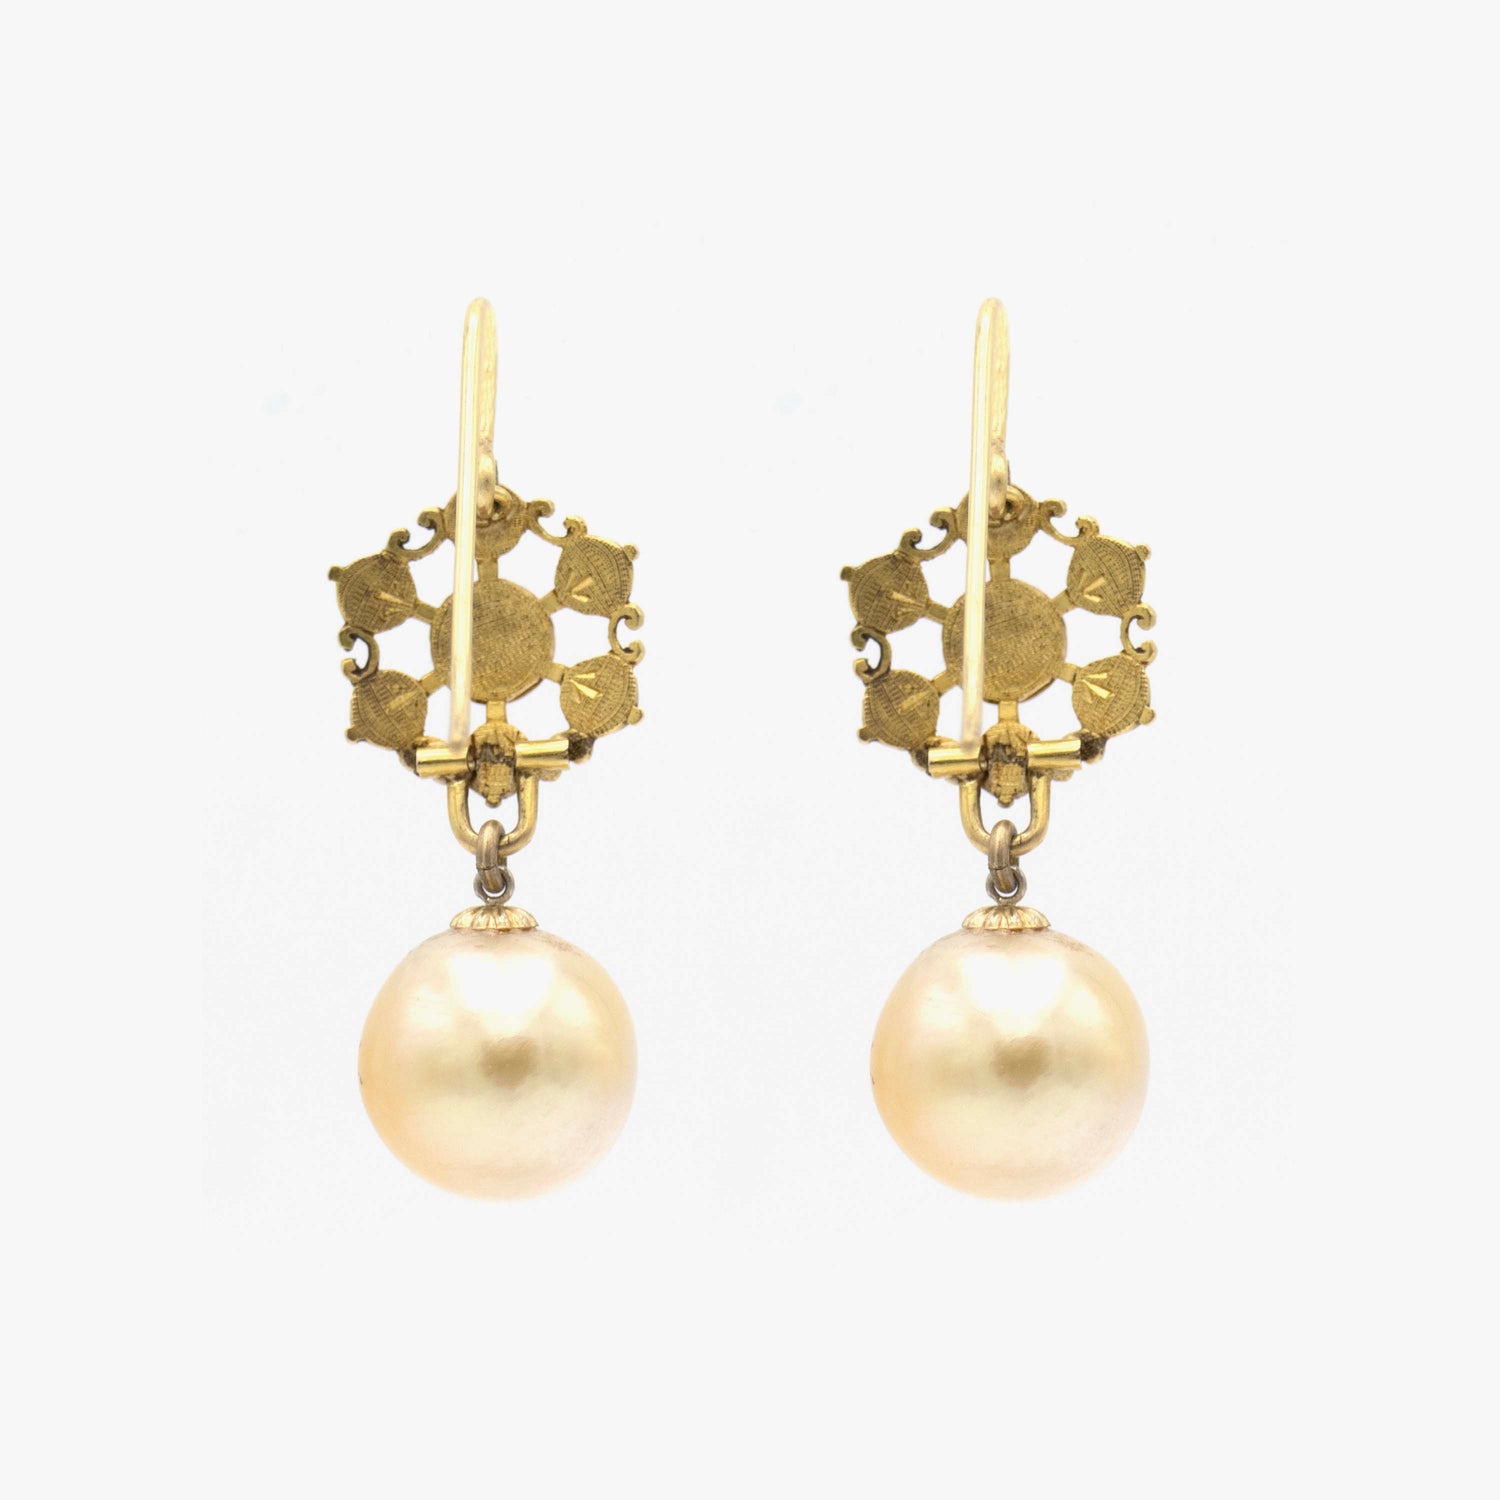 Irit Design Antique 18K Gold and Diamond Earrings with Pearls